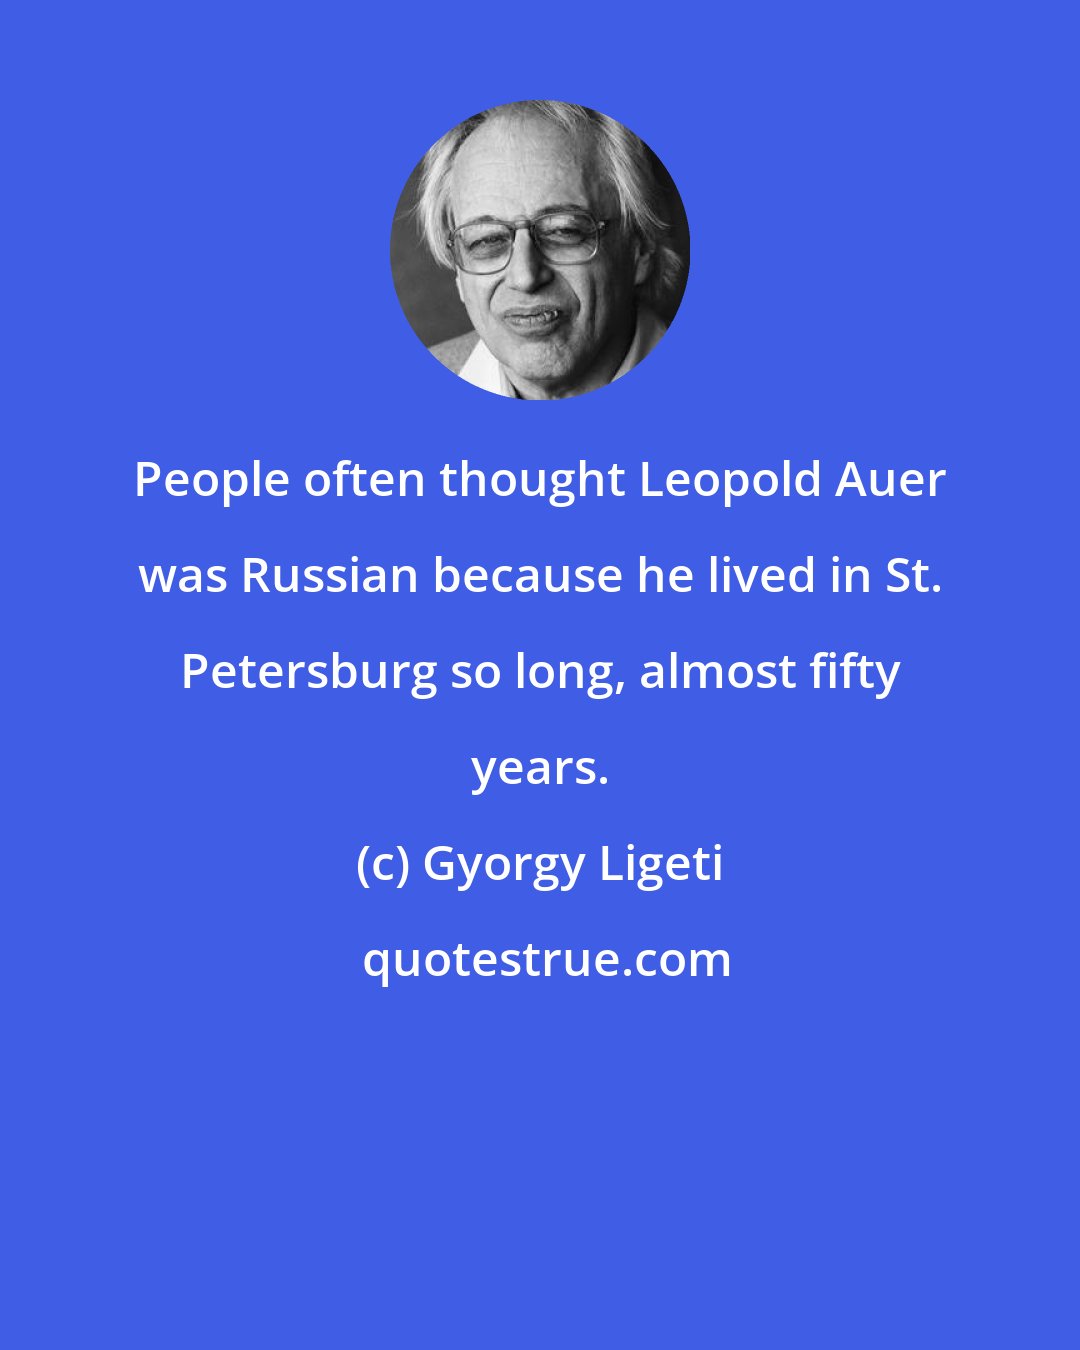 Gyorgy Ligeti: People often thought Leopold Auer was Russian because he lived in St. Petersburg so long, almost fifty years.